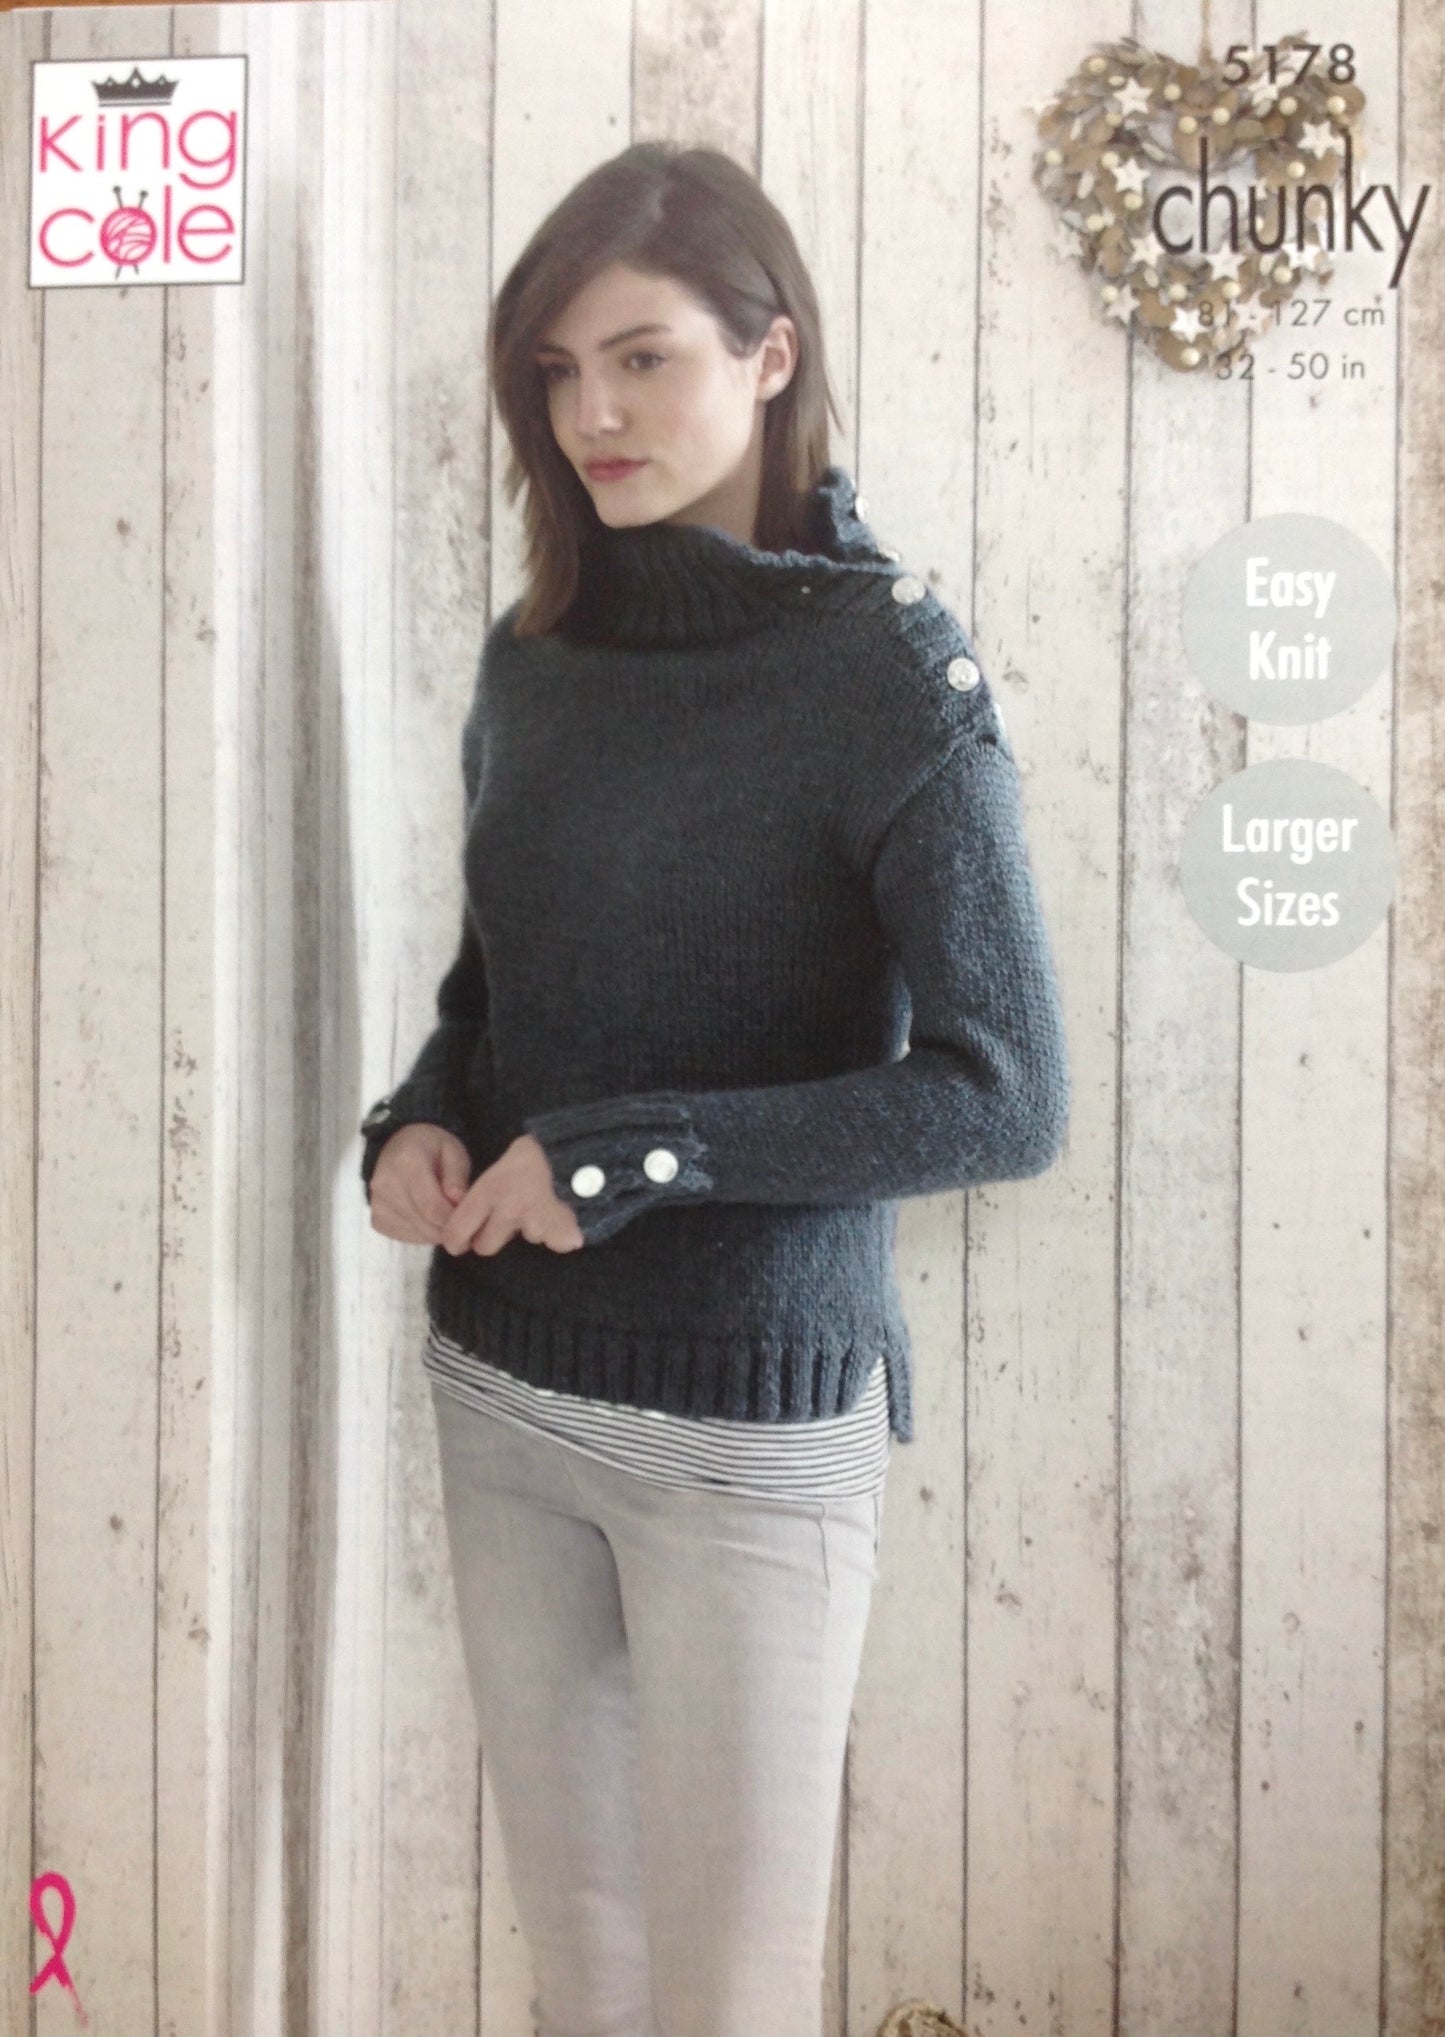 5178 King Cole Chunky Sweaters and Hat Knitting Pattern